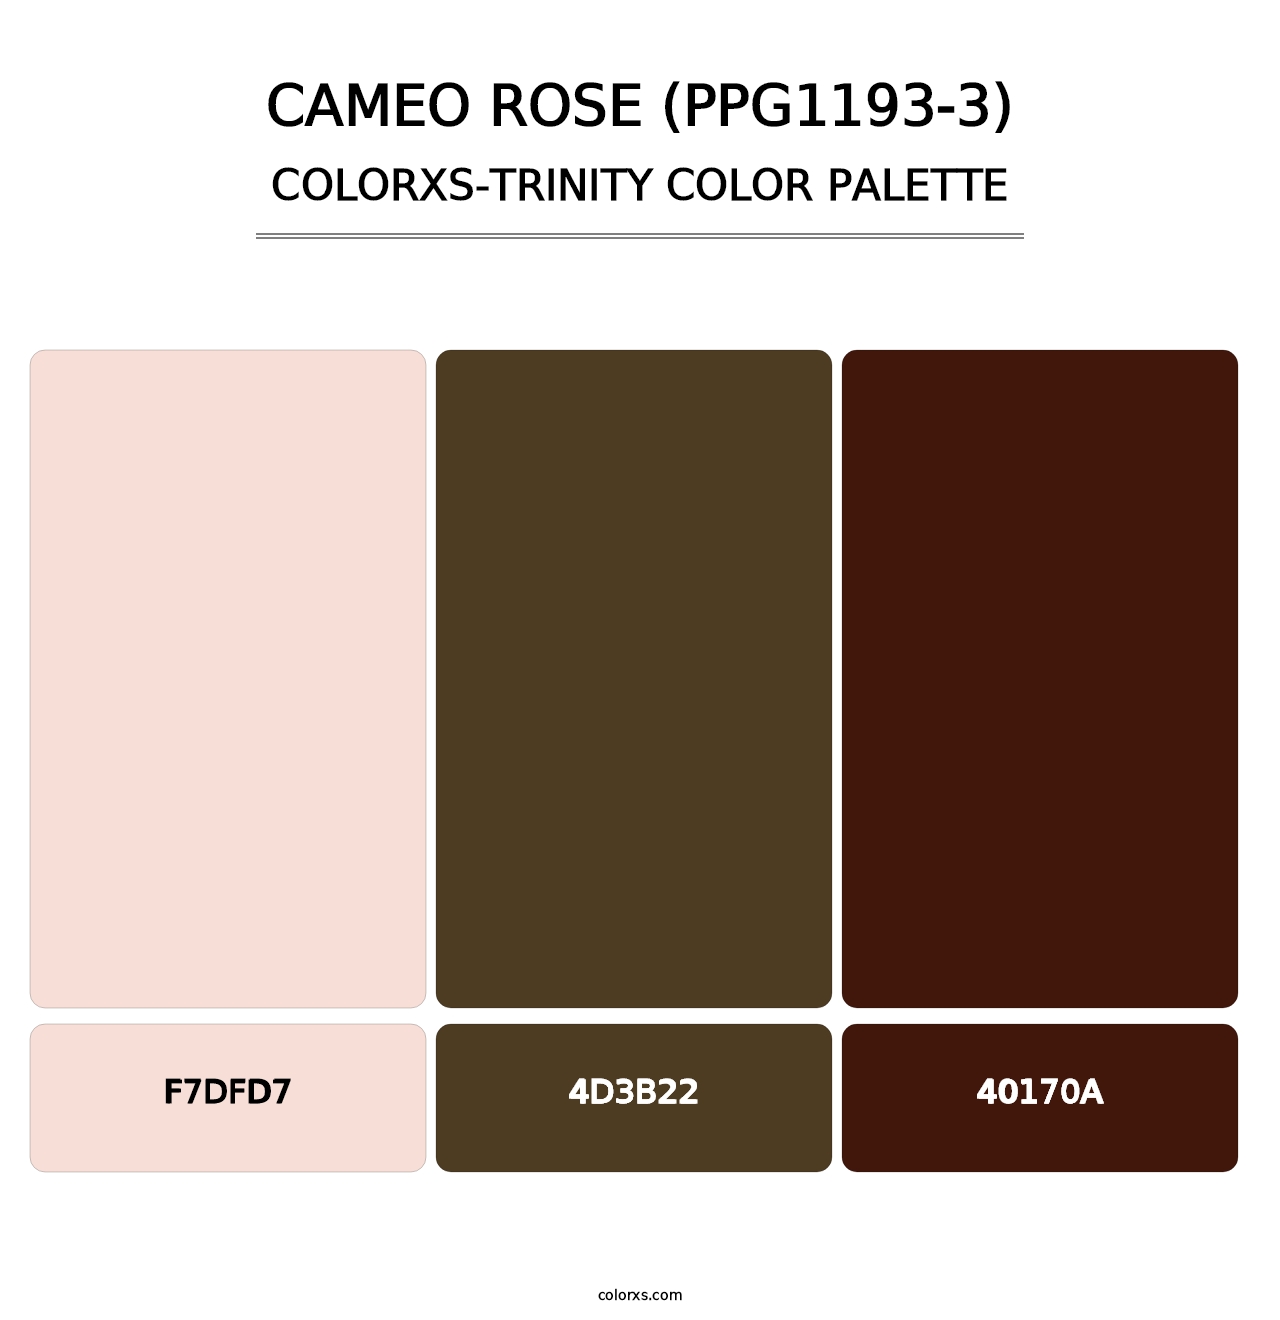 Cameo Rose (PPG1193-3) - Colorxs Trinity Palette